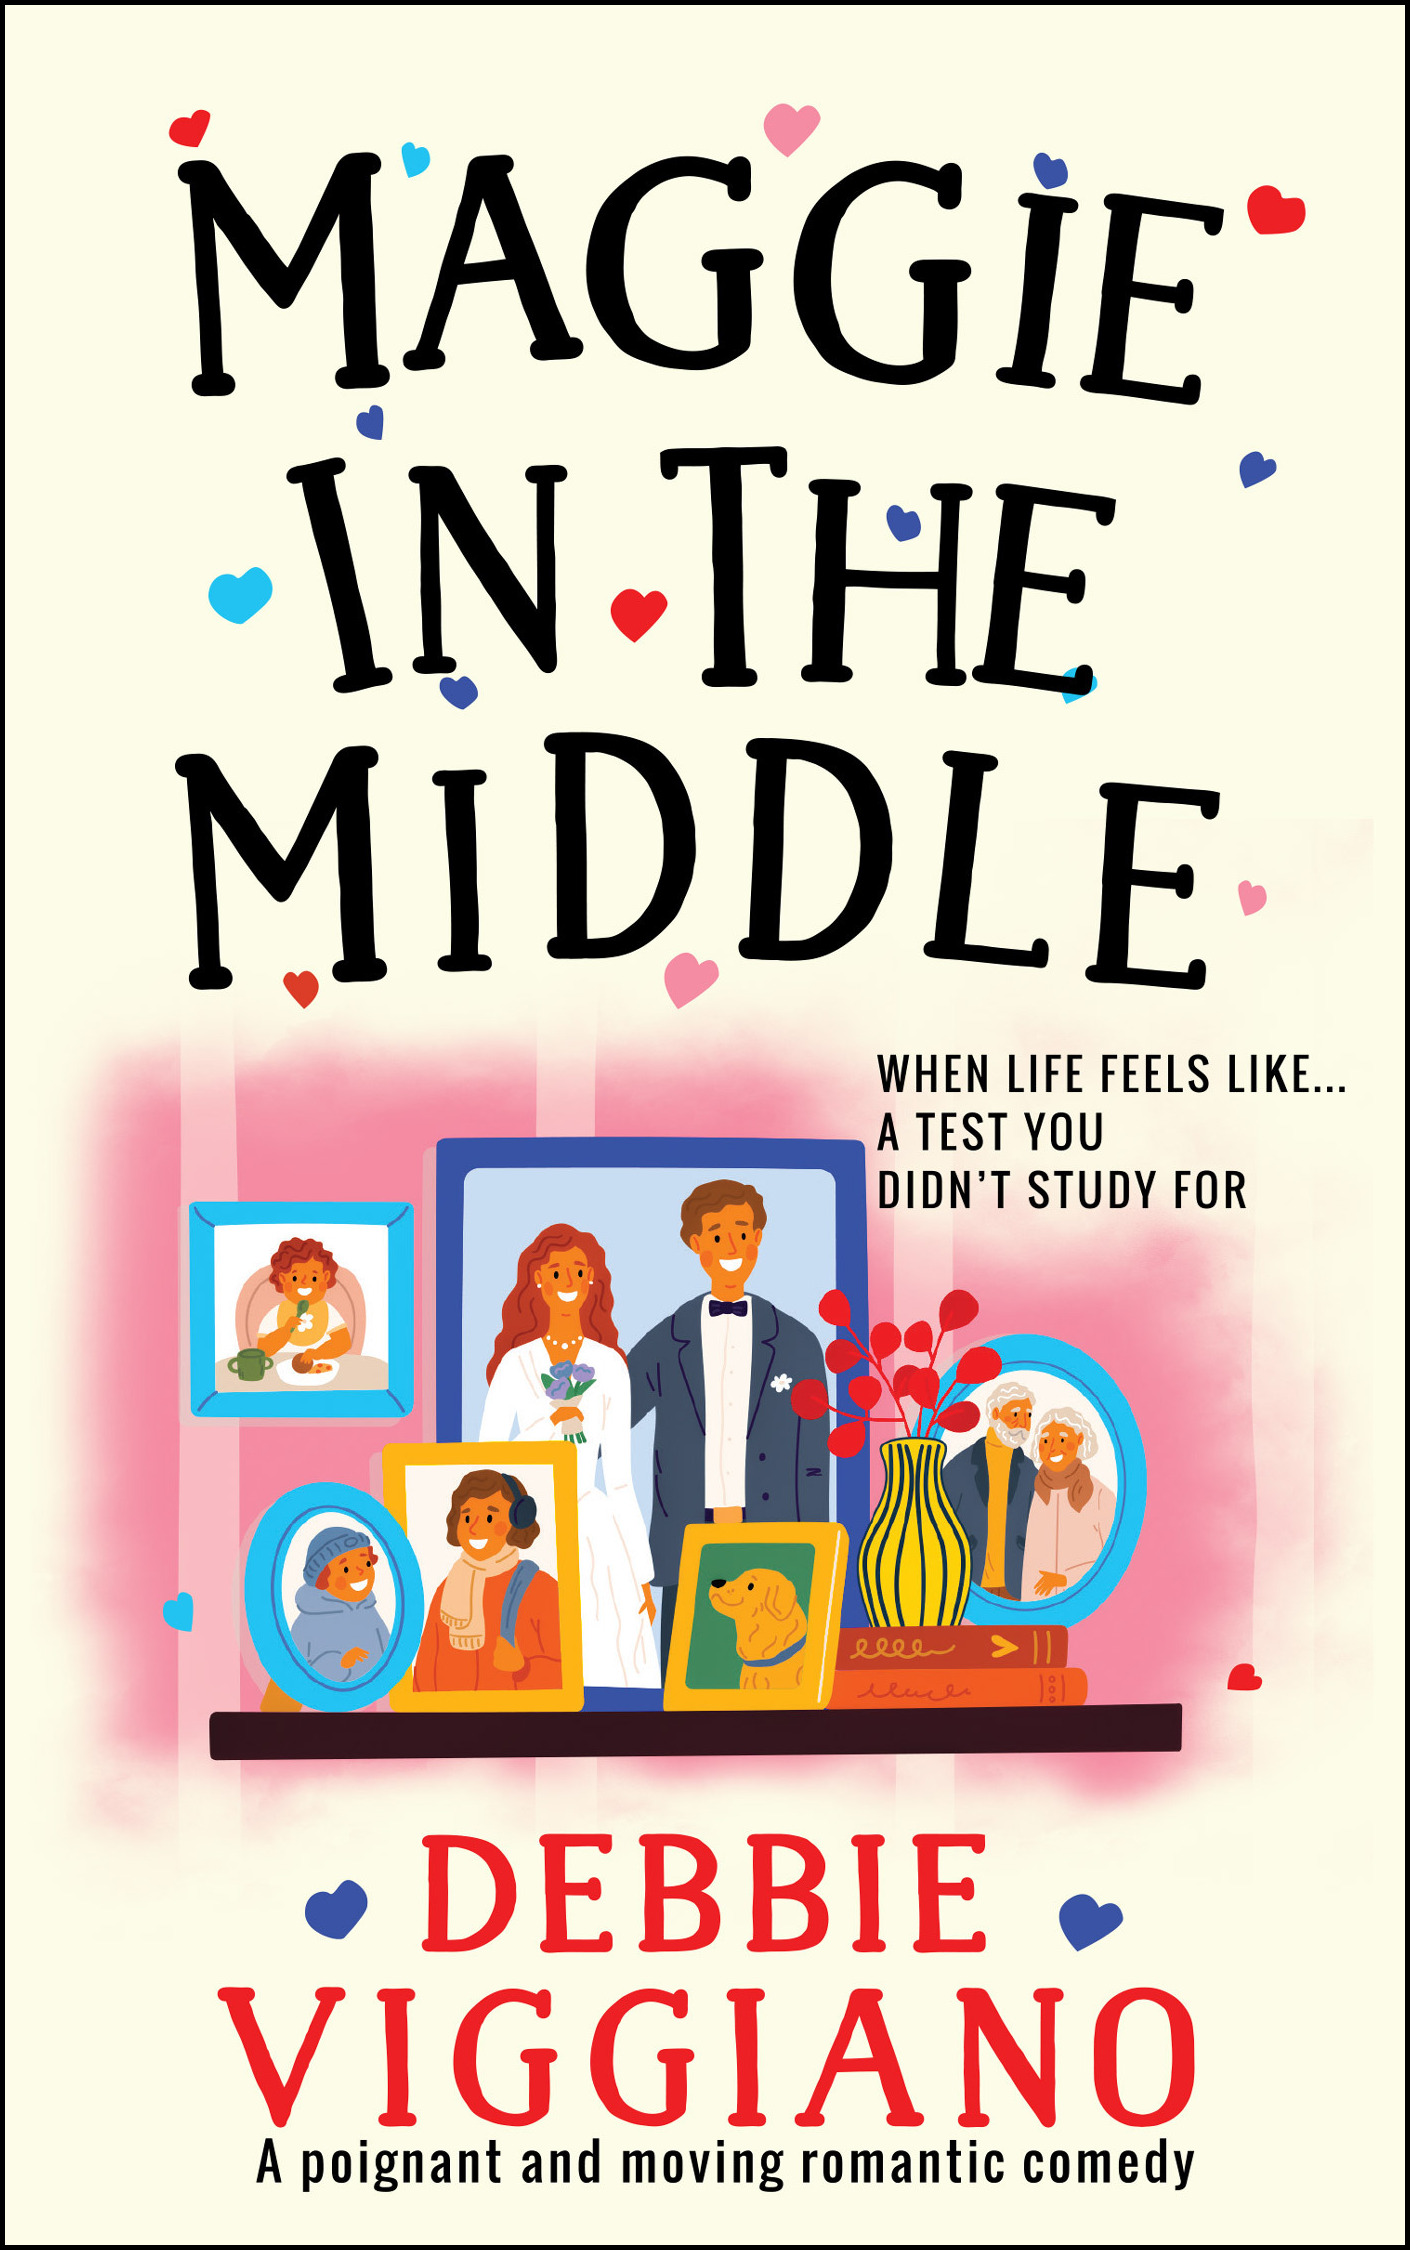 BLOG TOUR – Maggie in the Middle by Debbie Viggiano